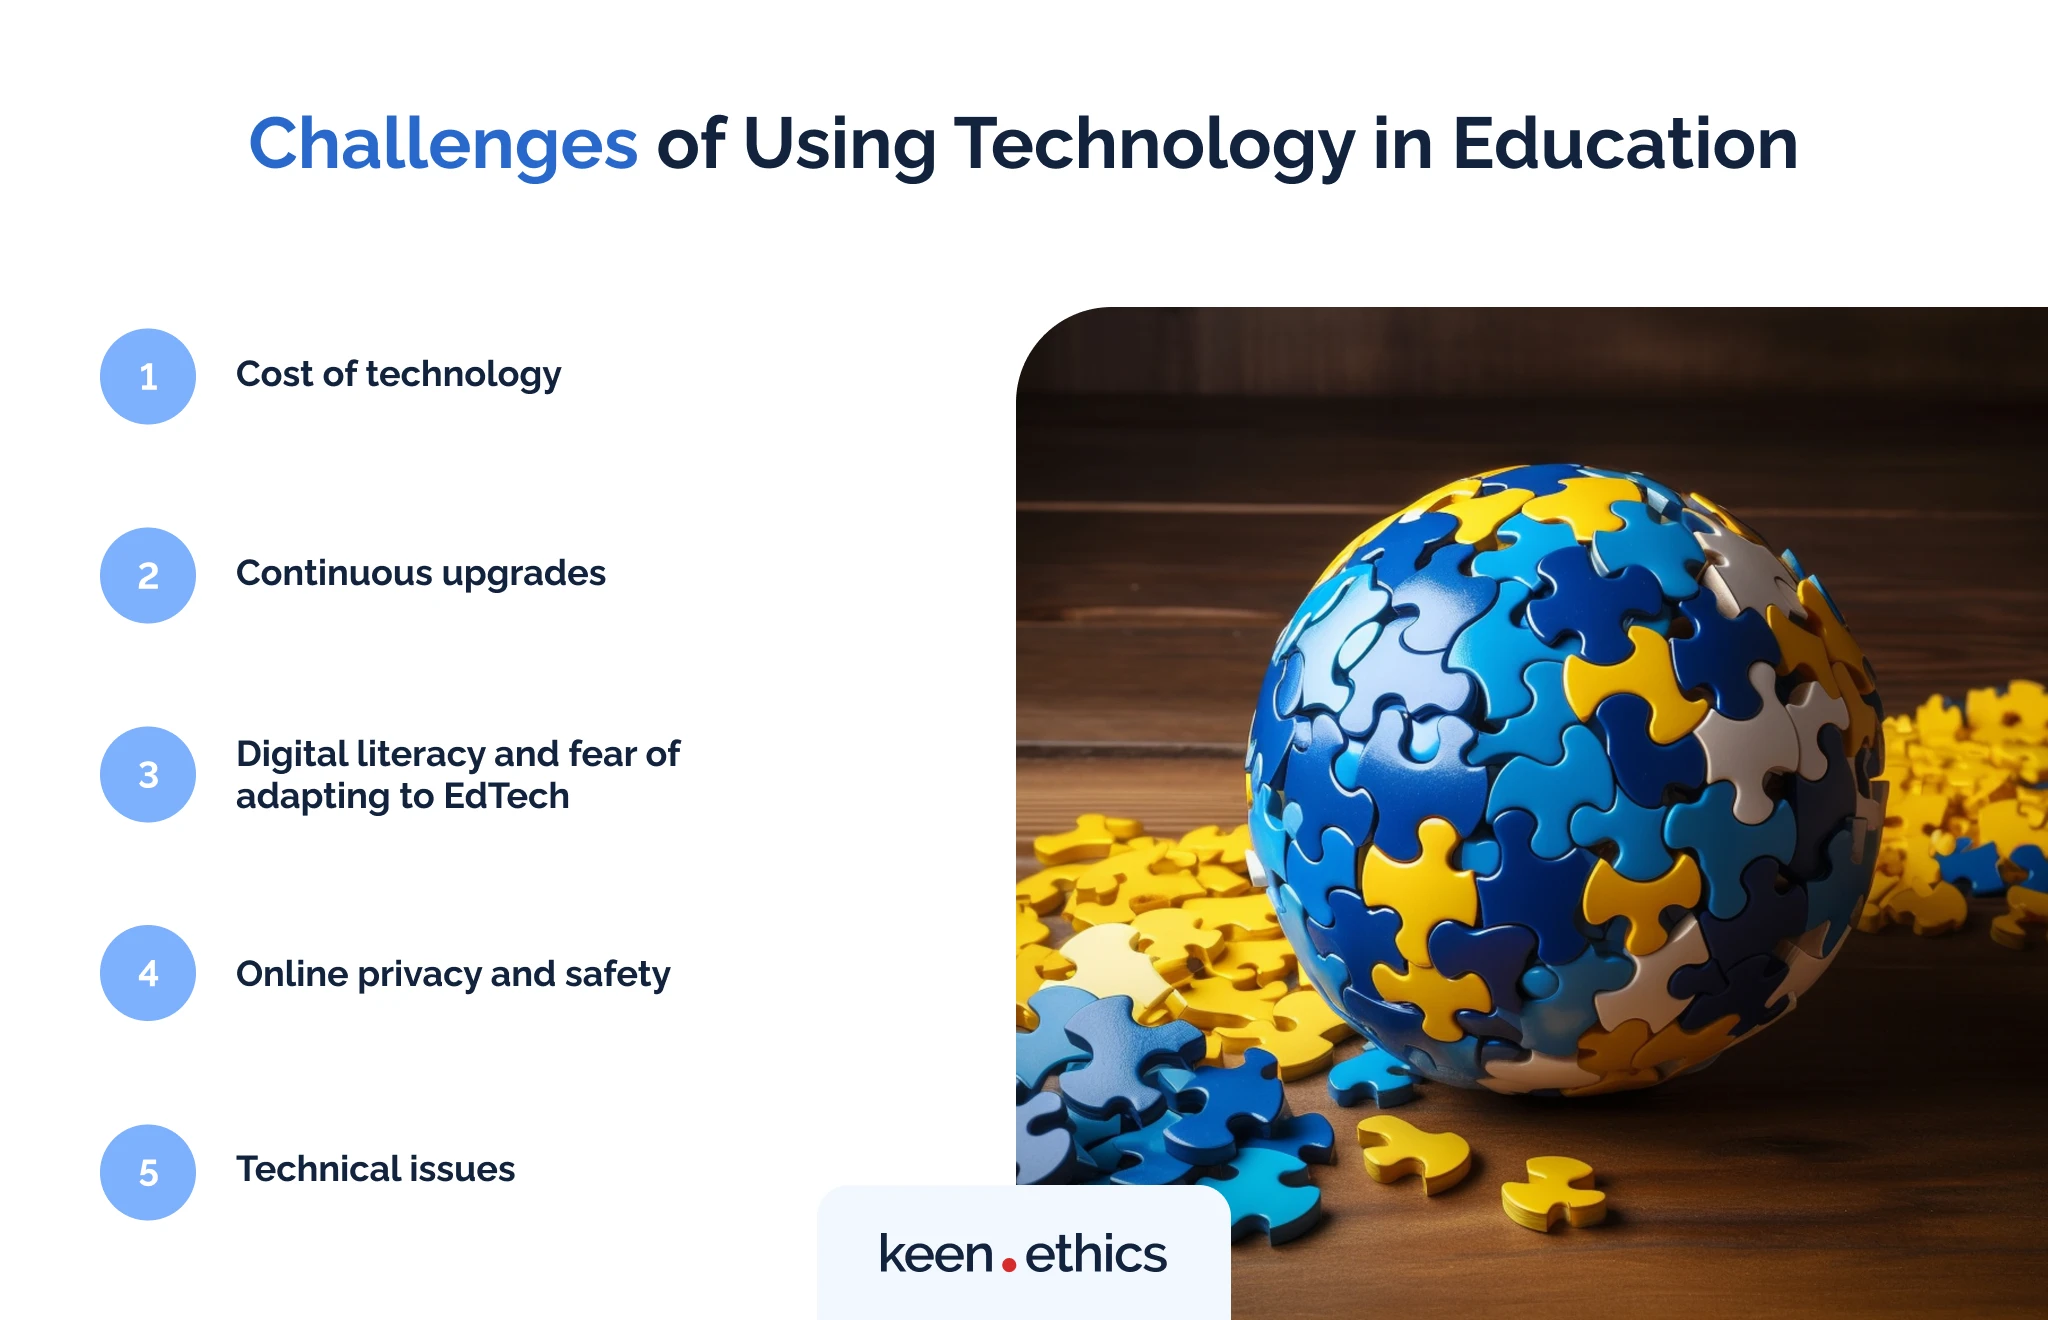 Challenges of using technology in education